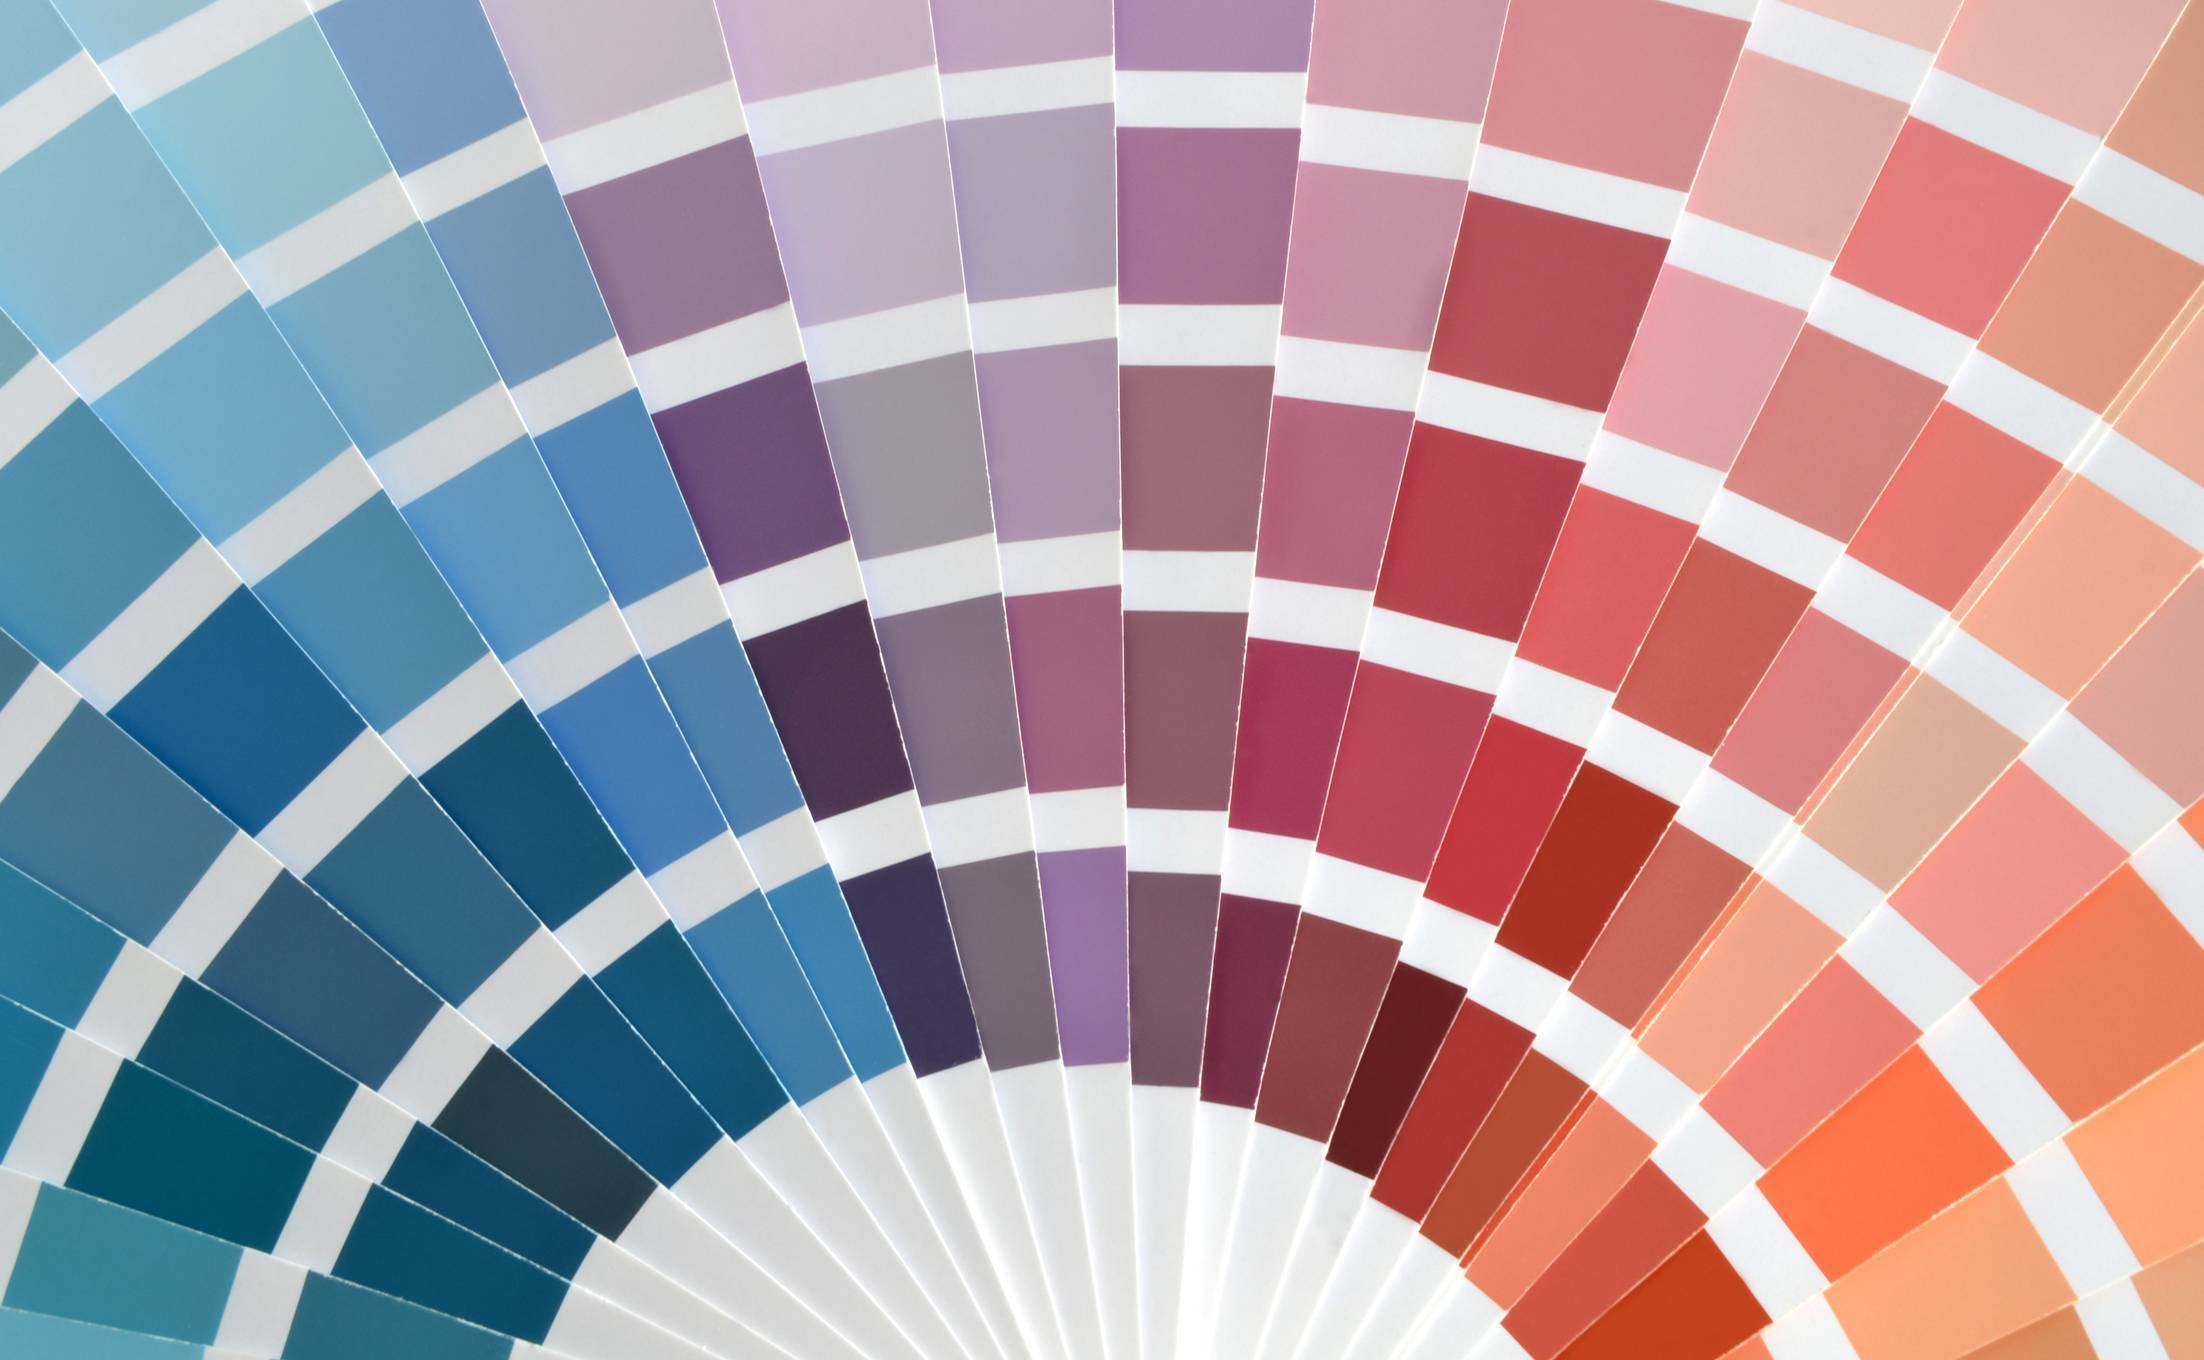 Color matching systems often involve booklets of color samples like these